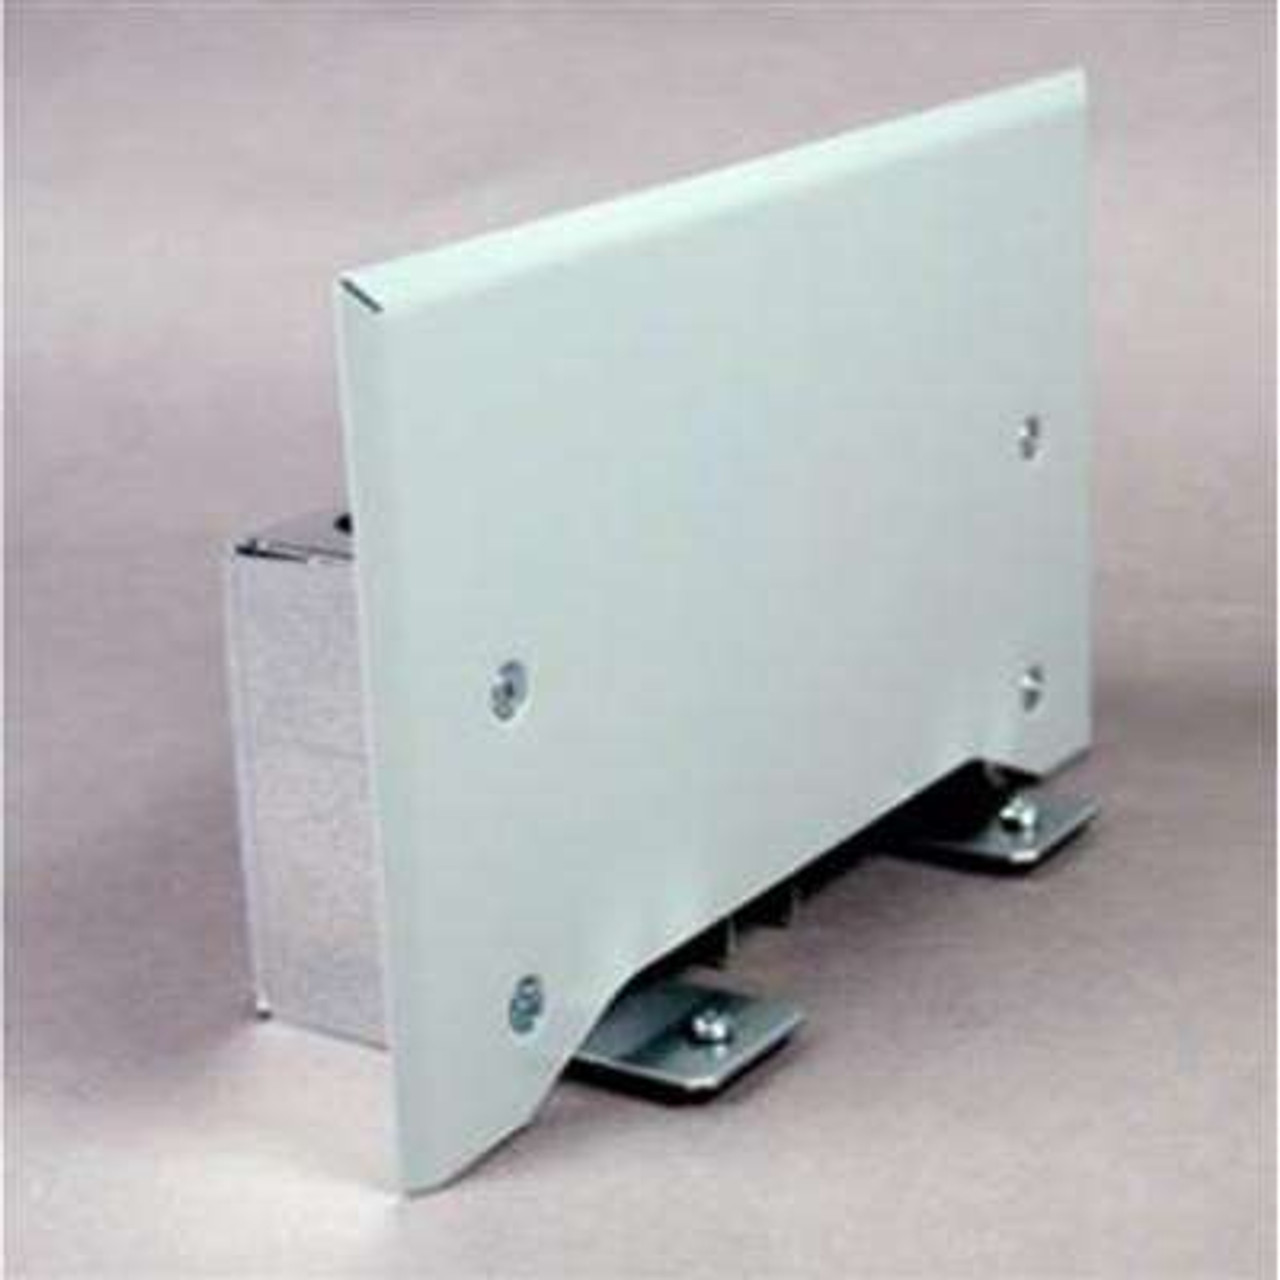 Wiremold OFR Series Overfloor Raceway from Legrand